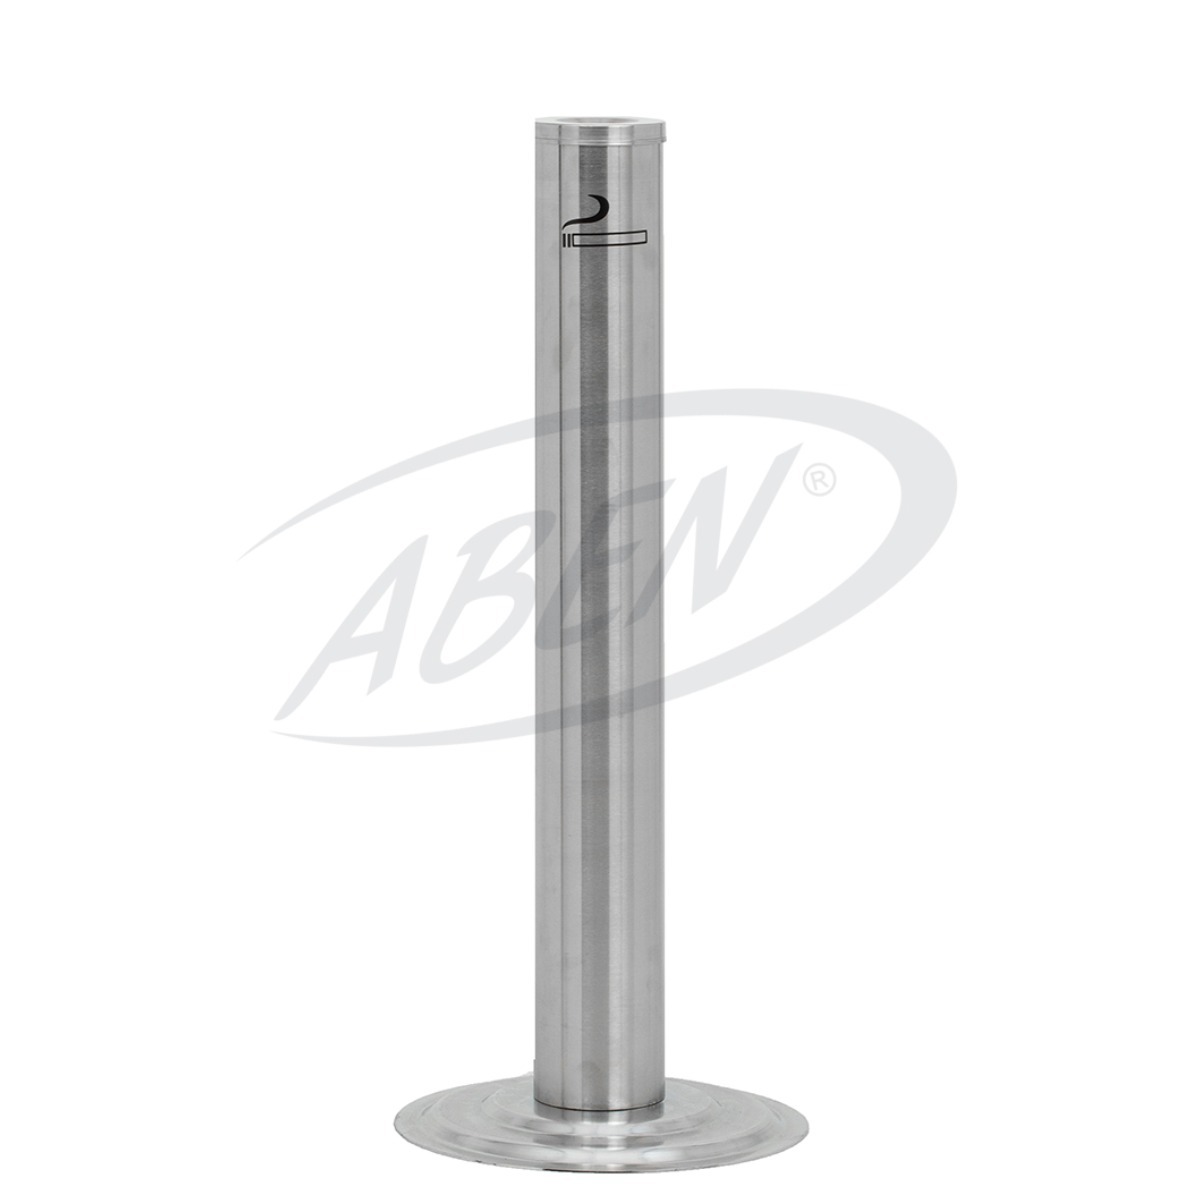 AB-103 Outdoor Ashtray Stainless